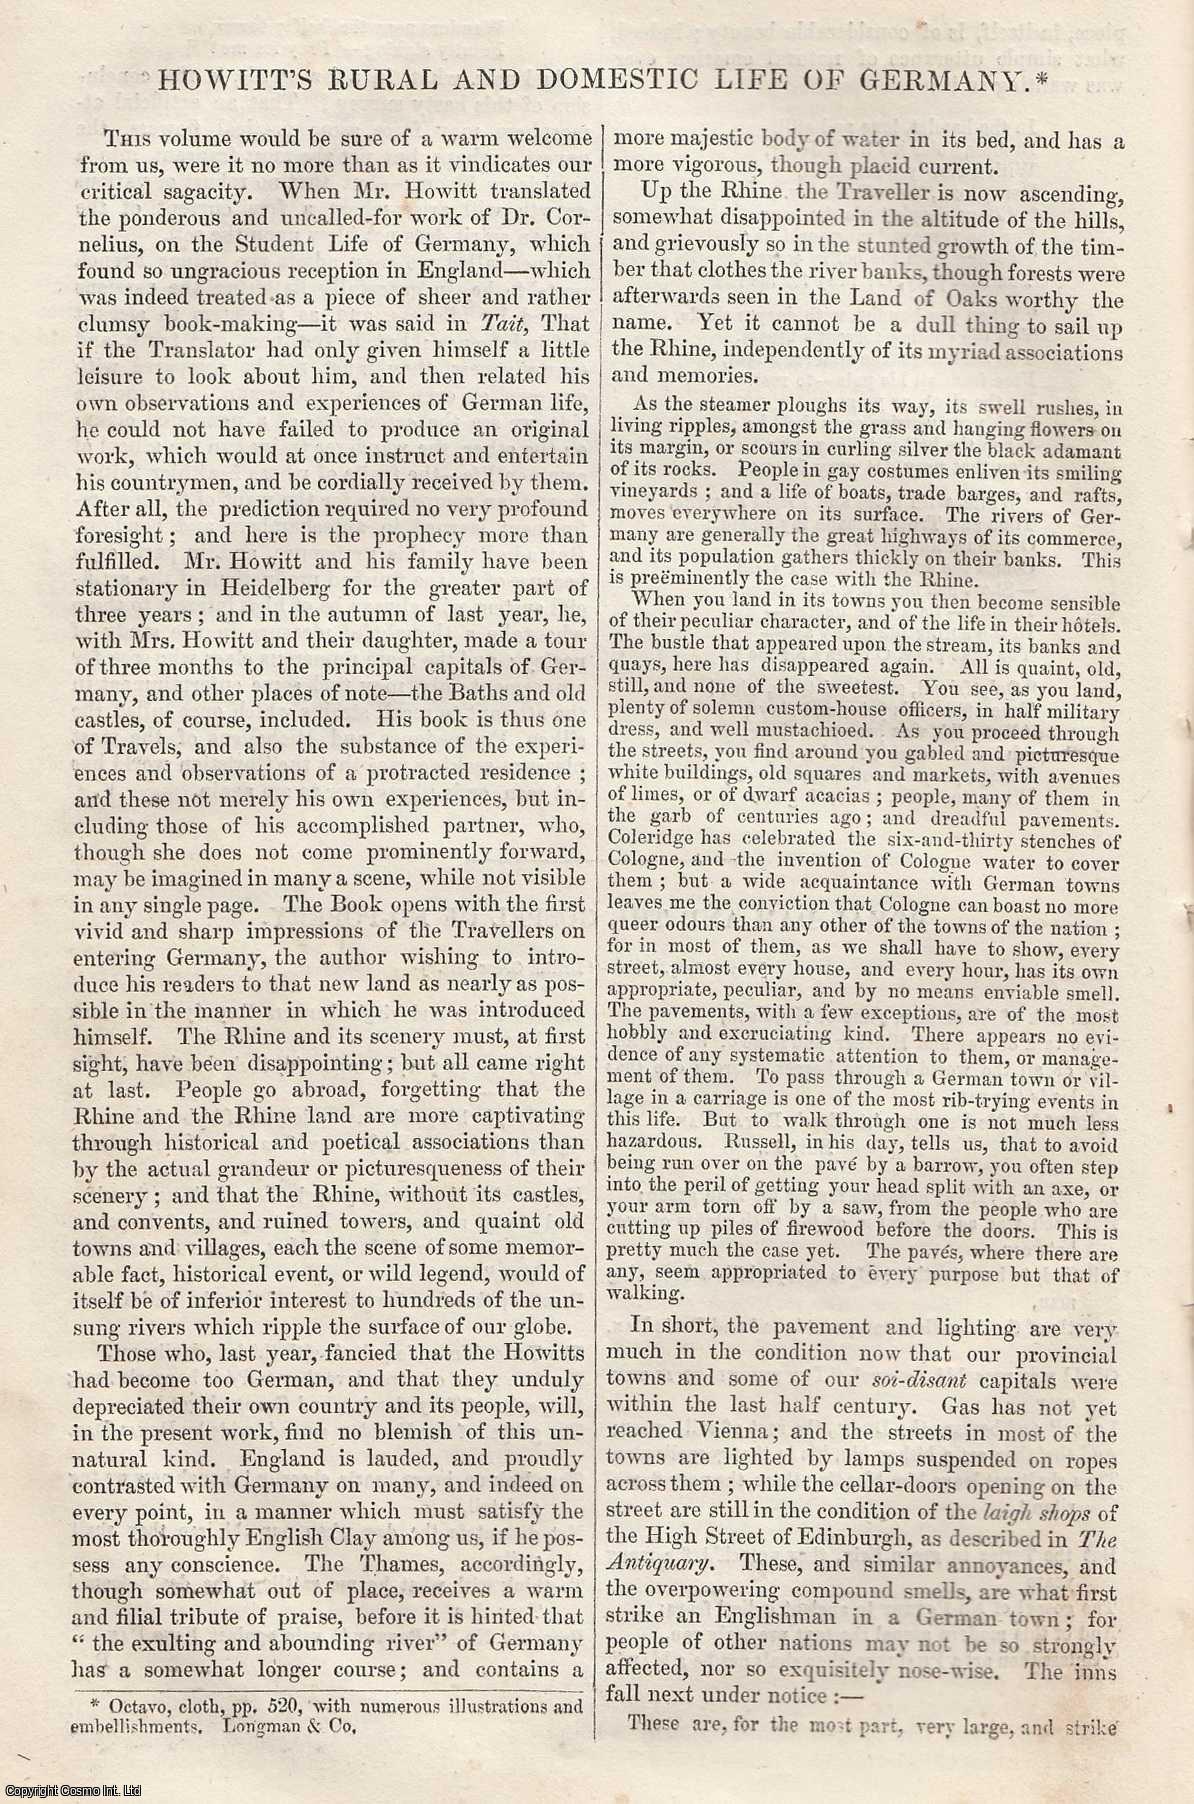 Johnstone, Christian - Howitt's Rural and Domestic Life of Germany (Part 1). An original article from Tait's Edinburgh Magazine, 1843.